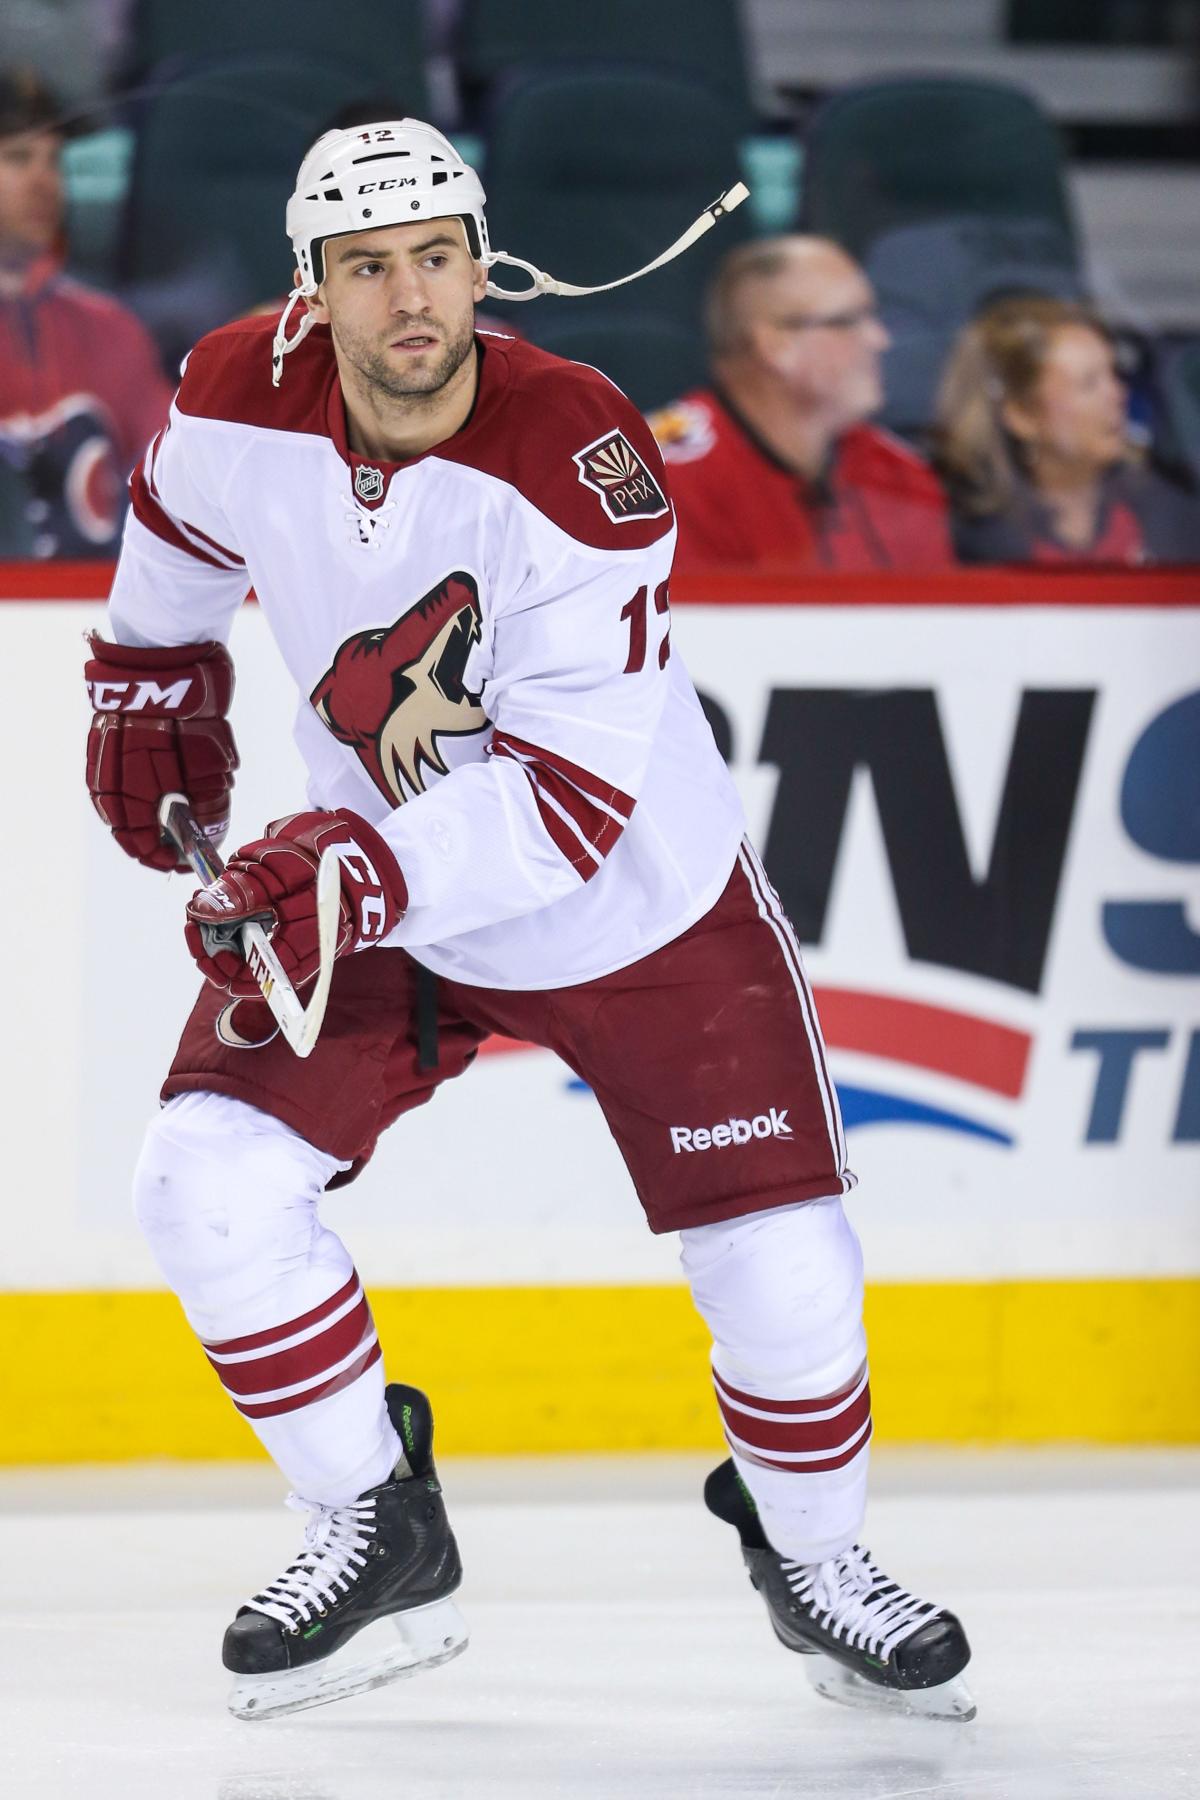 Paul Bissonnette owns up to Oilers losing bet, gets ridiculous haircut